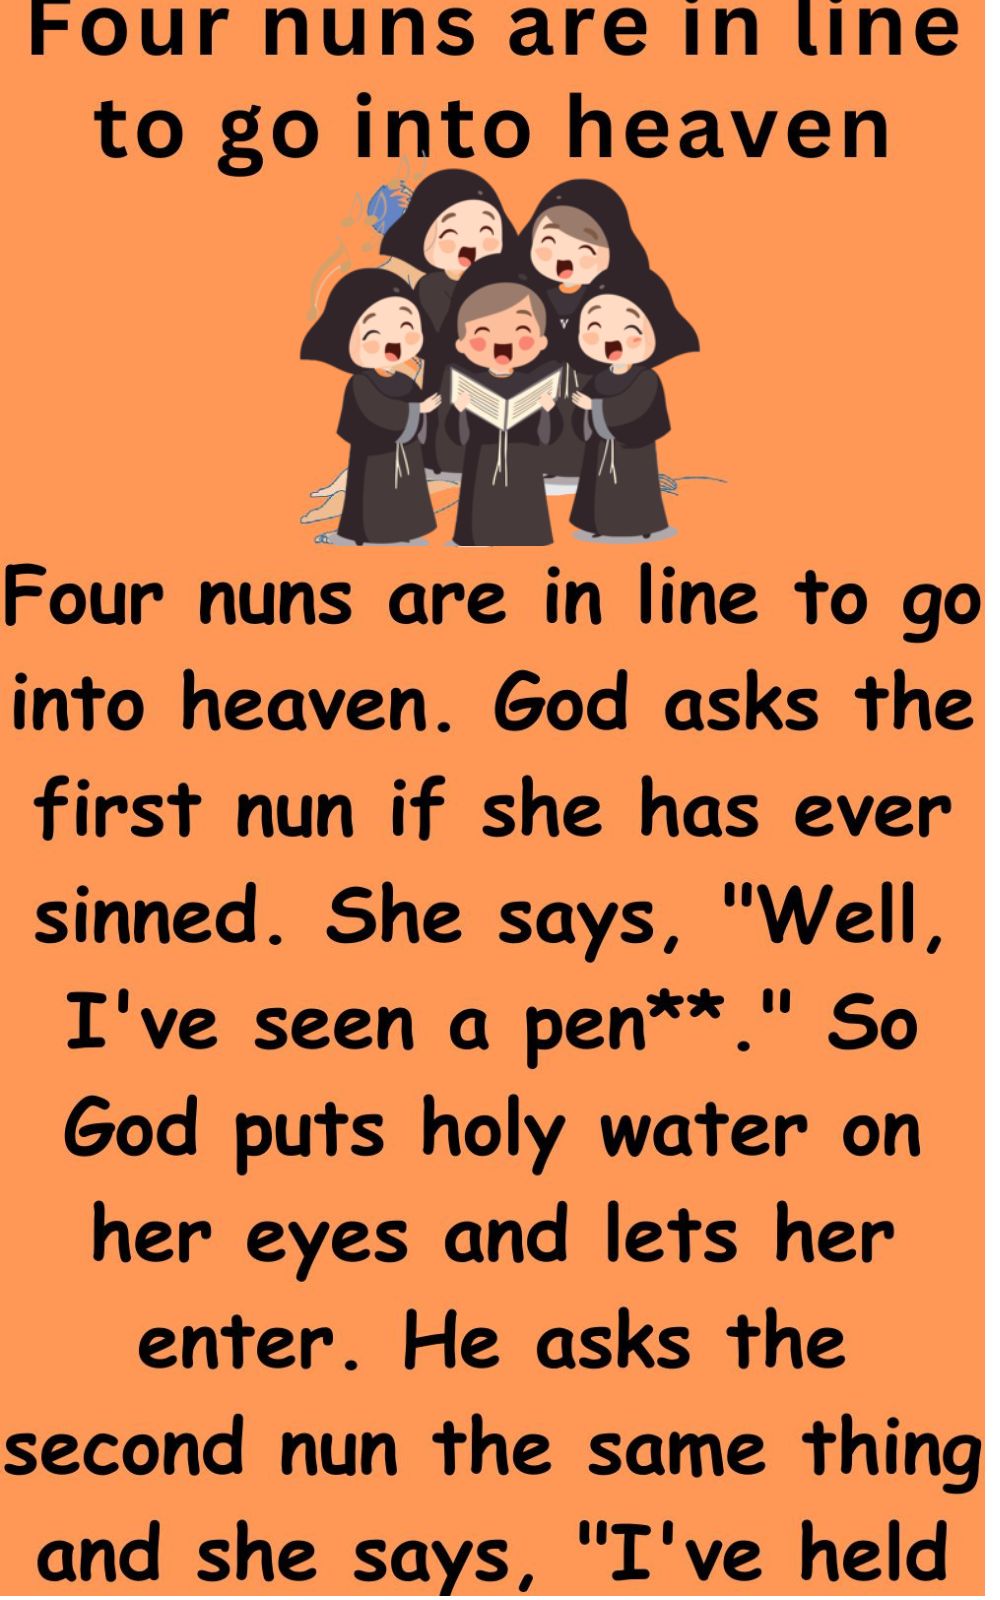 Four nuns are in line to go into heaven